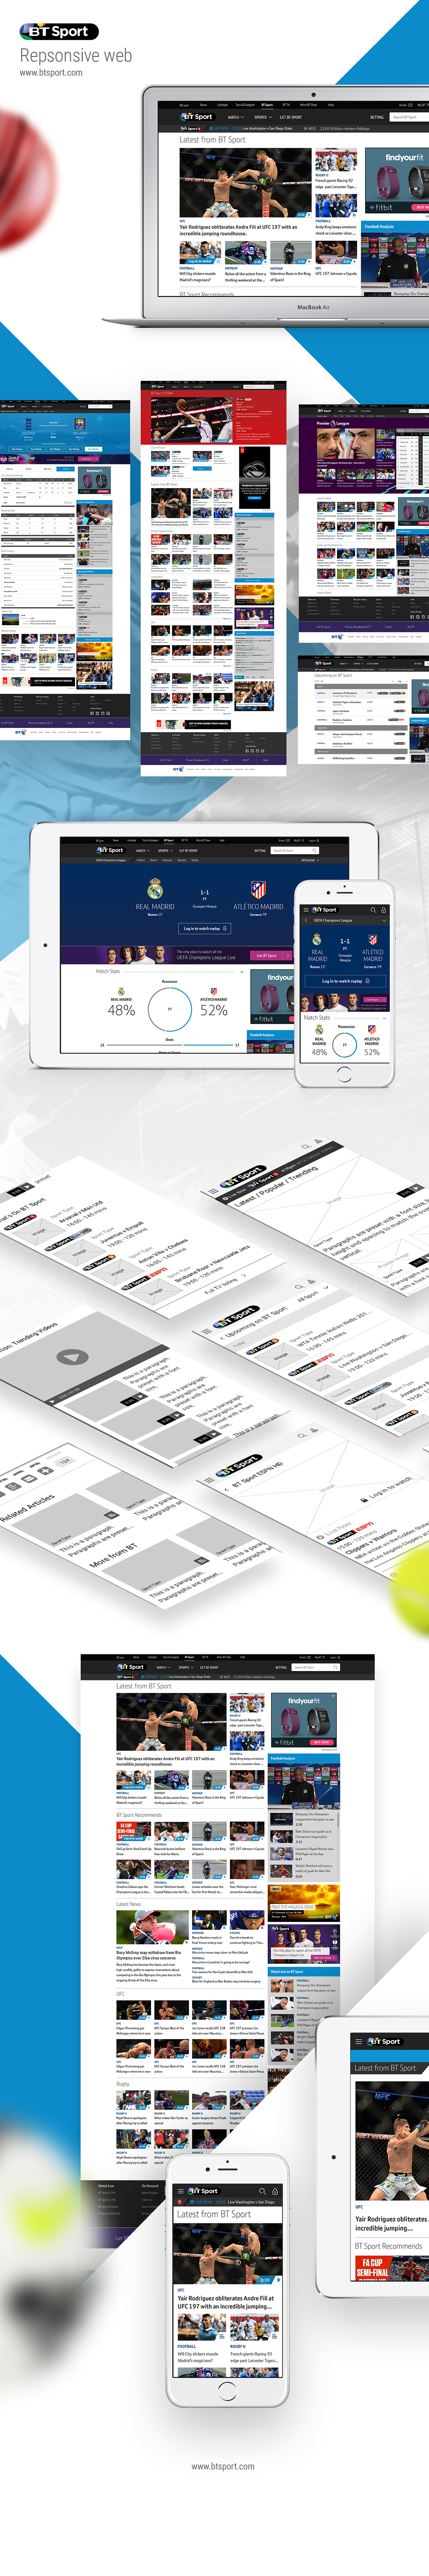 ux UI Web design Responsive Omi Channel wireframe